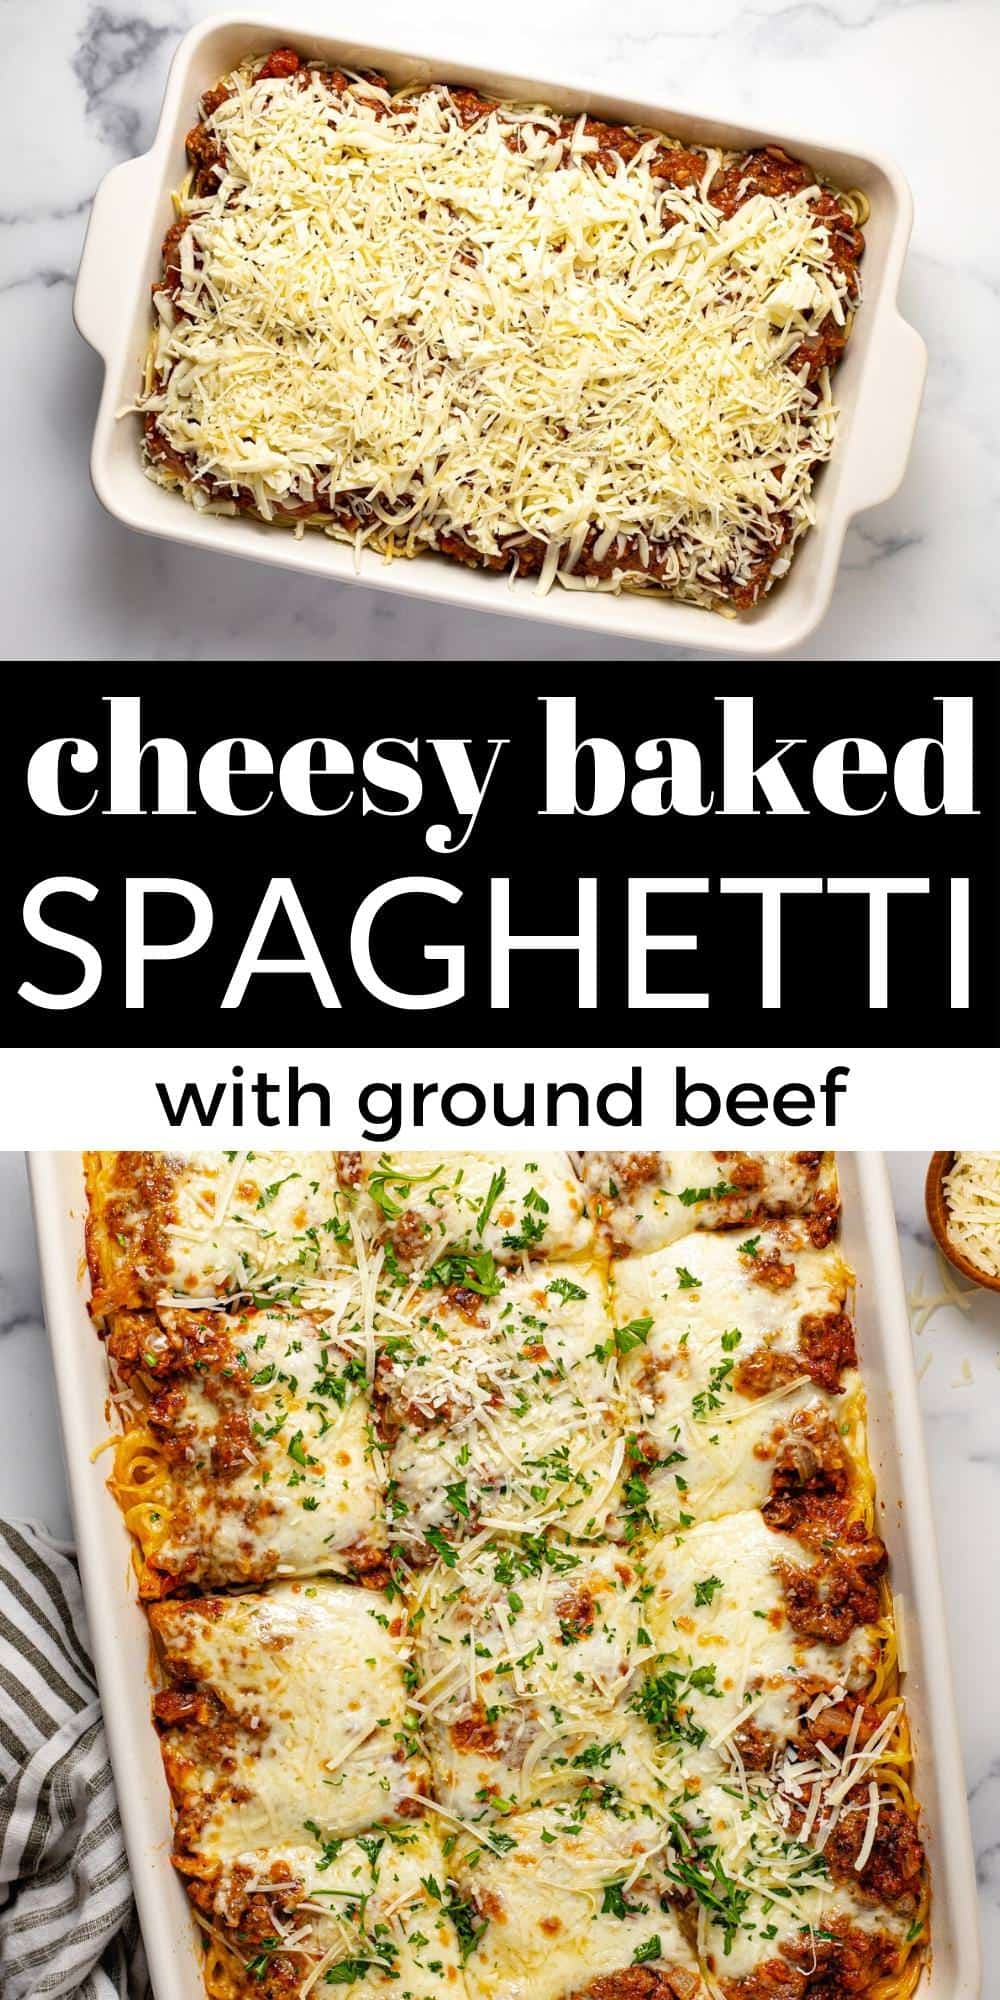 Cheesy Baked Spaghetti Recipe with Ground Beef - Midwest Foodie